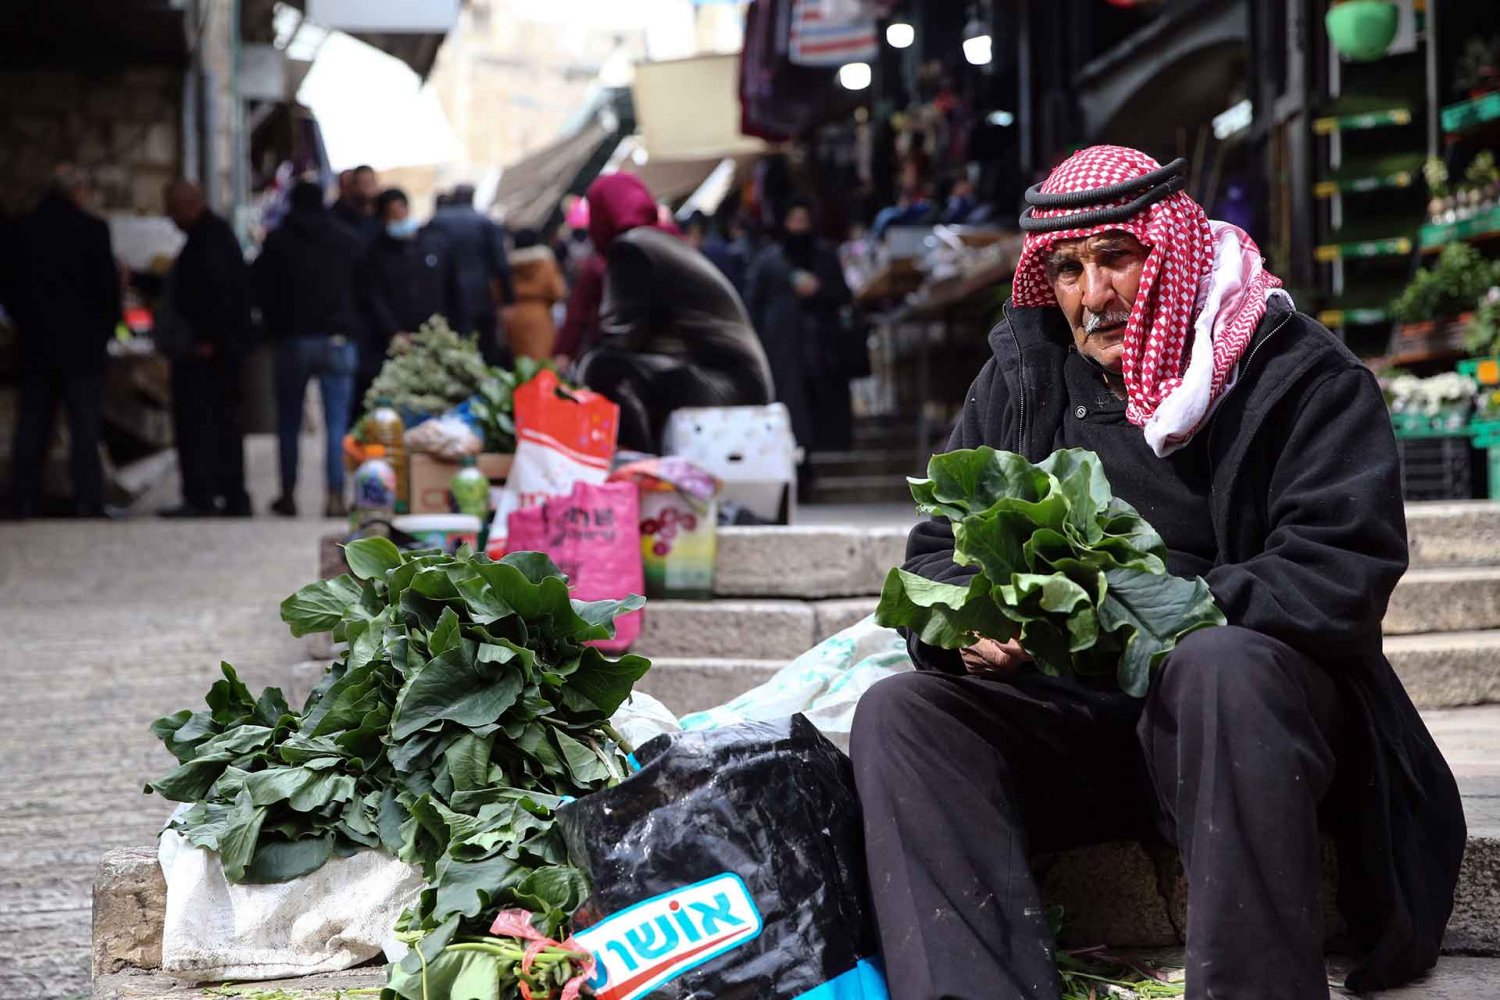 A Palestinian villager sells produce in the Old City of Jerusalem, February 2022.